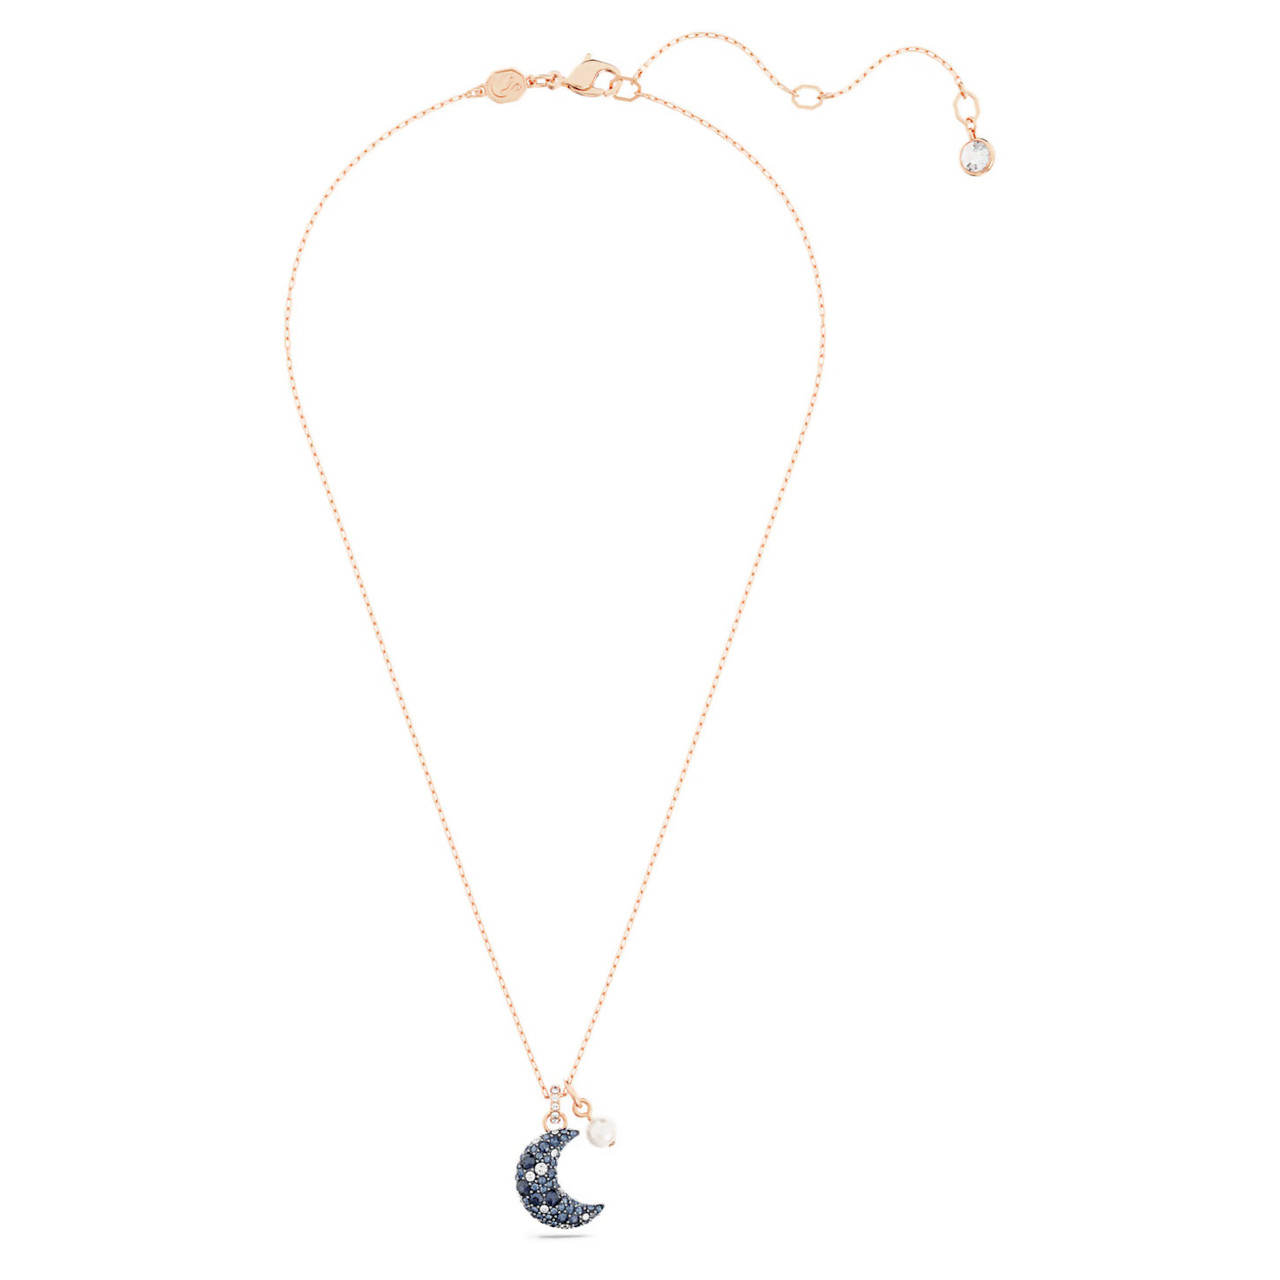 Buy Swarovski Star and 925 Crescent Moon Necklace Sterling Silver Crescent  Moon and Star Necklace 925 Moon Pendant With Star, Infinity Close Online in  India - Etsy